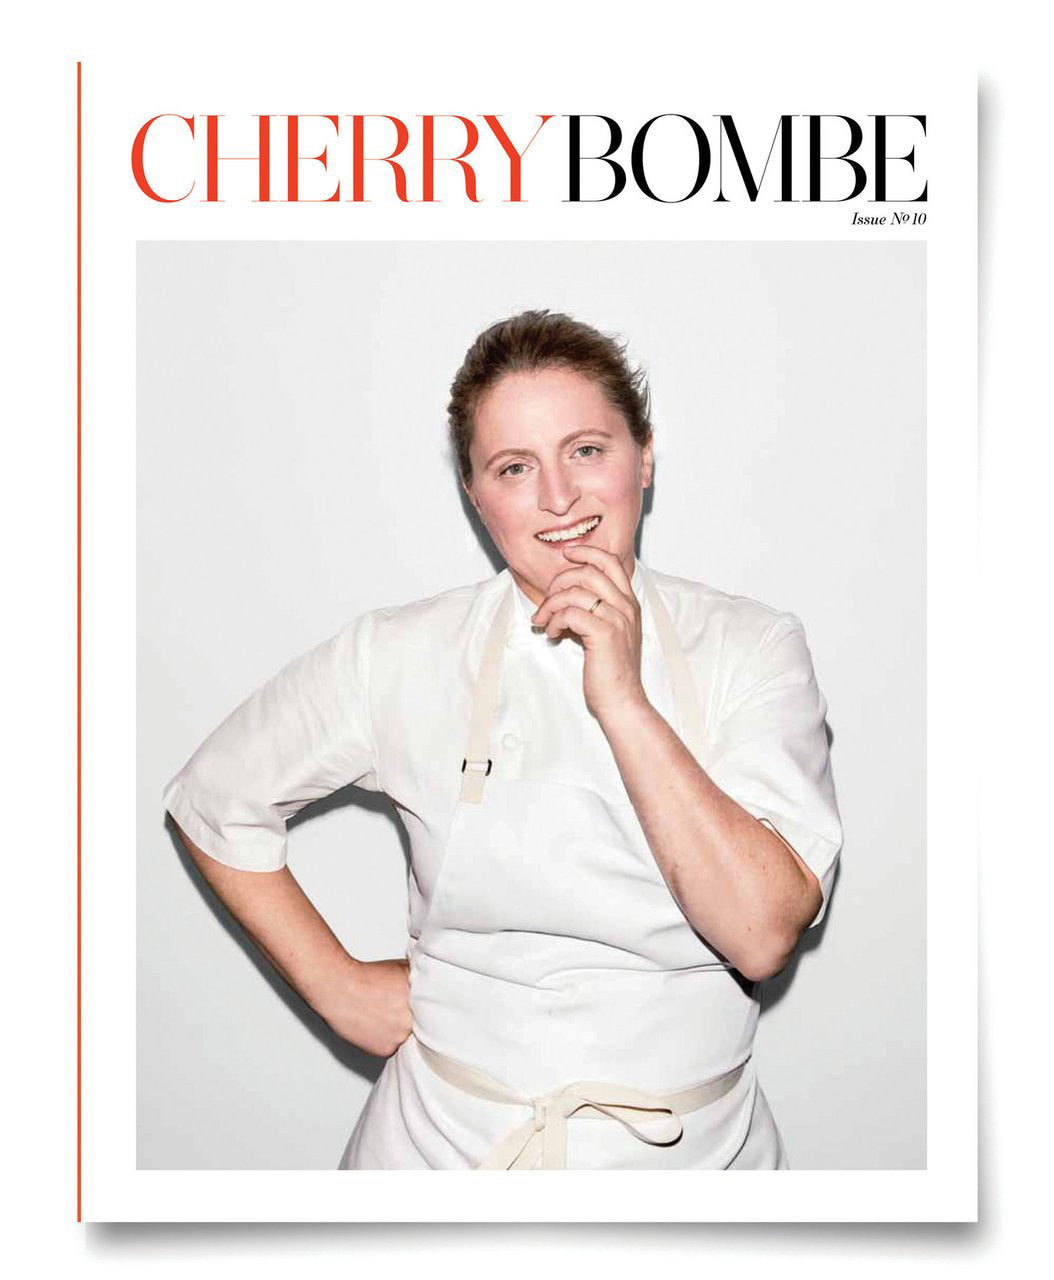 Issue Nº 10: Yes, Chef